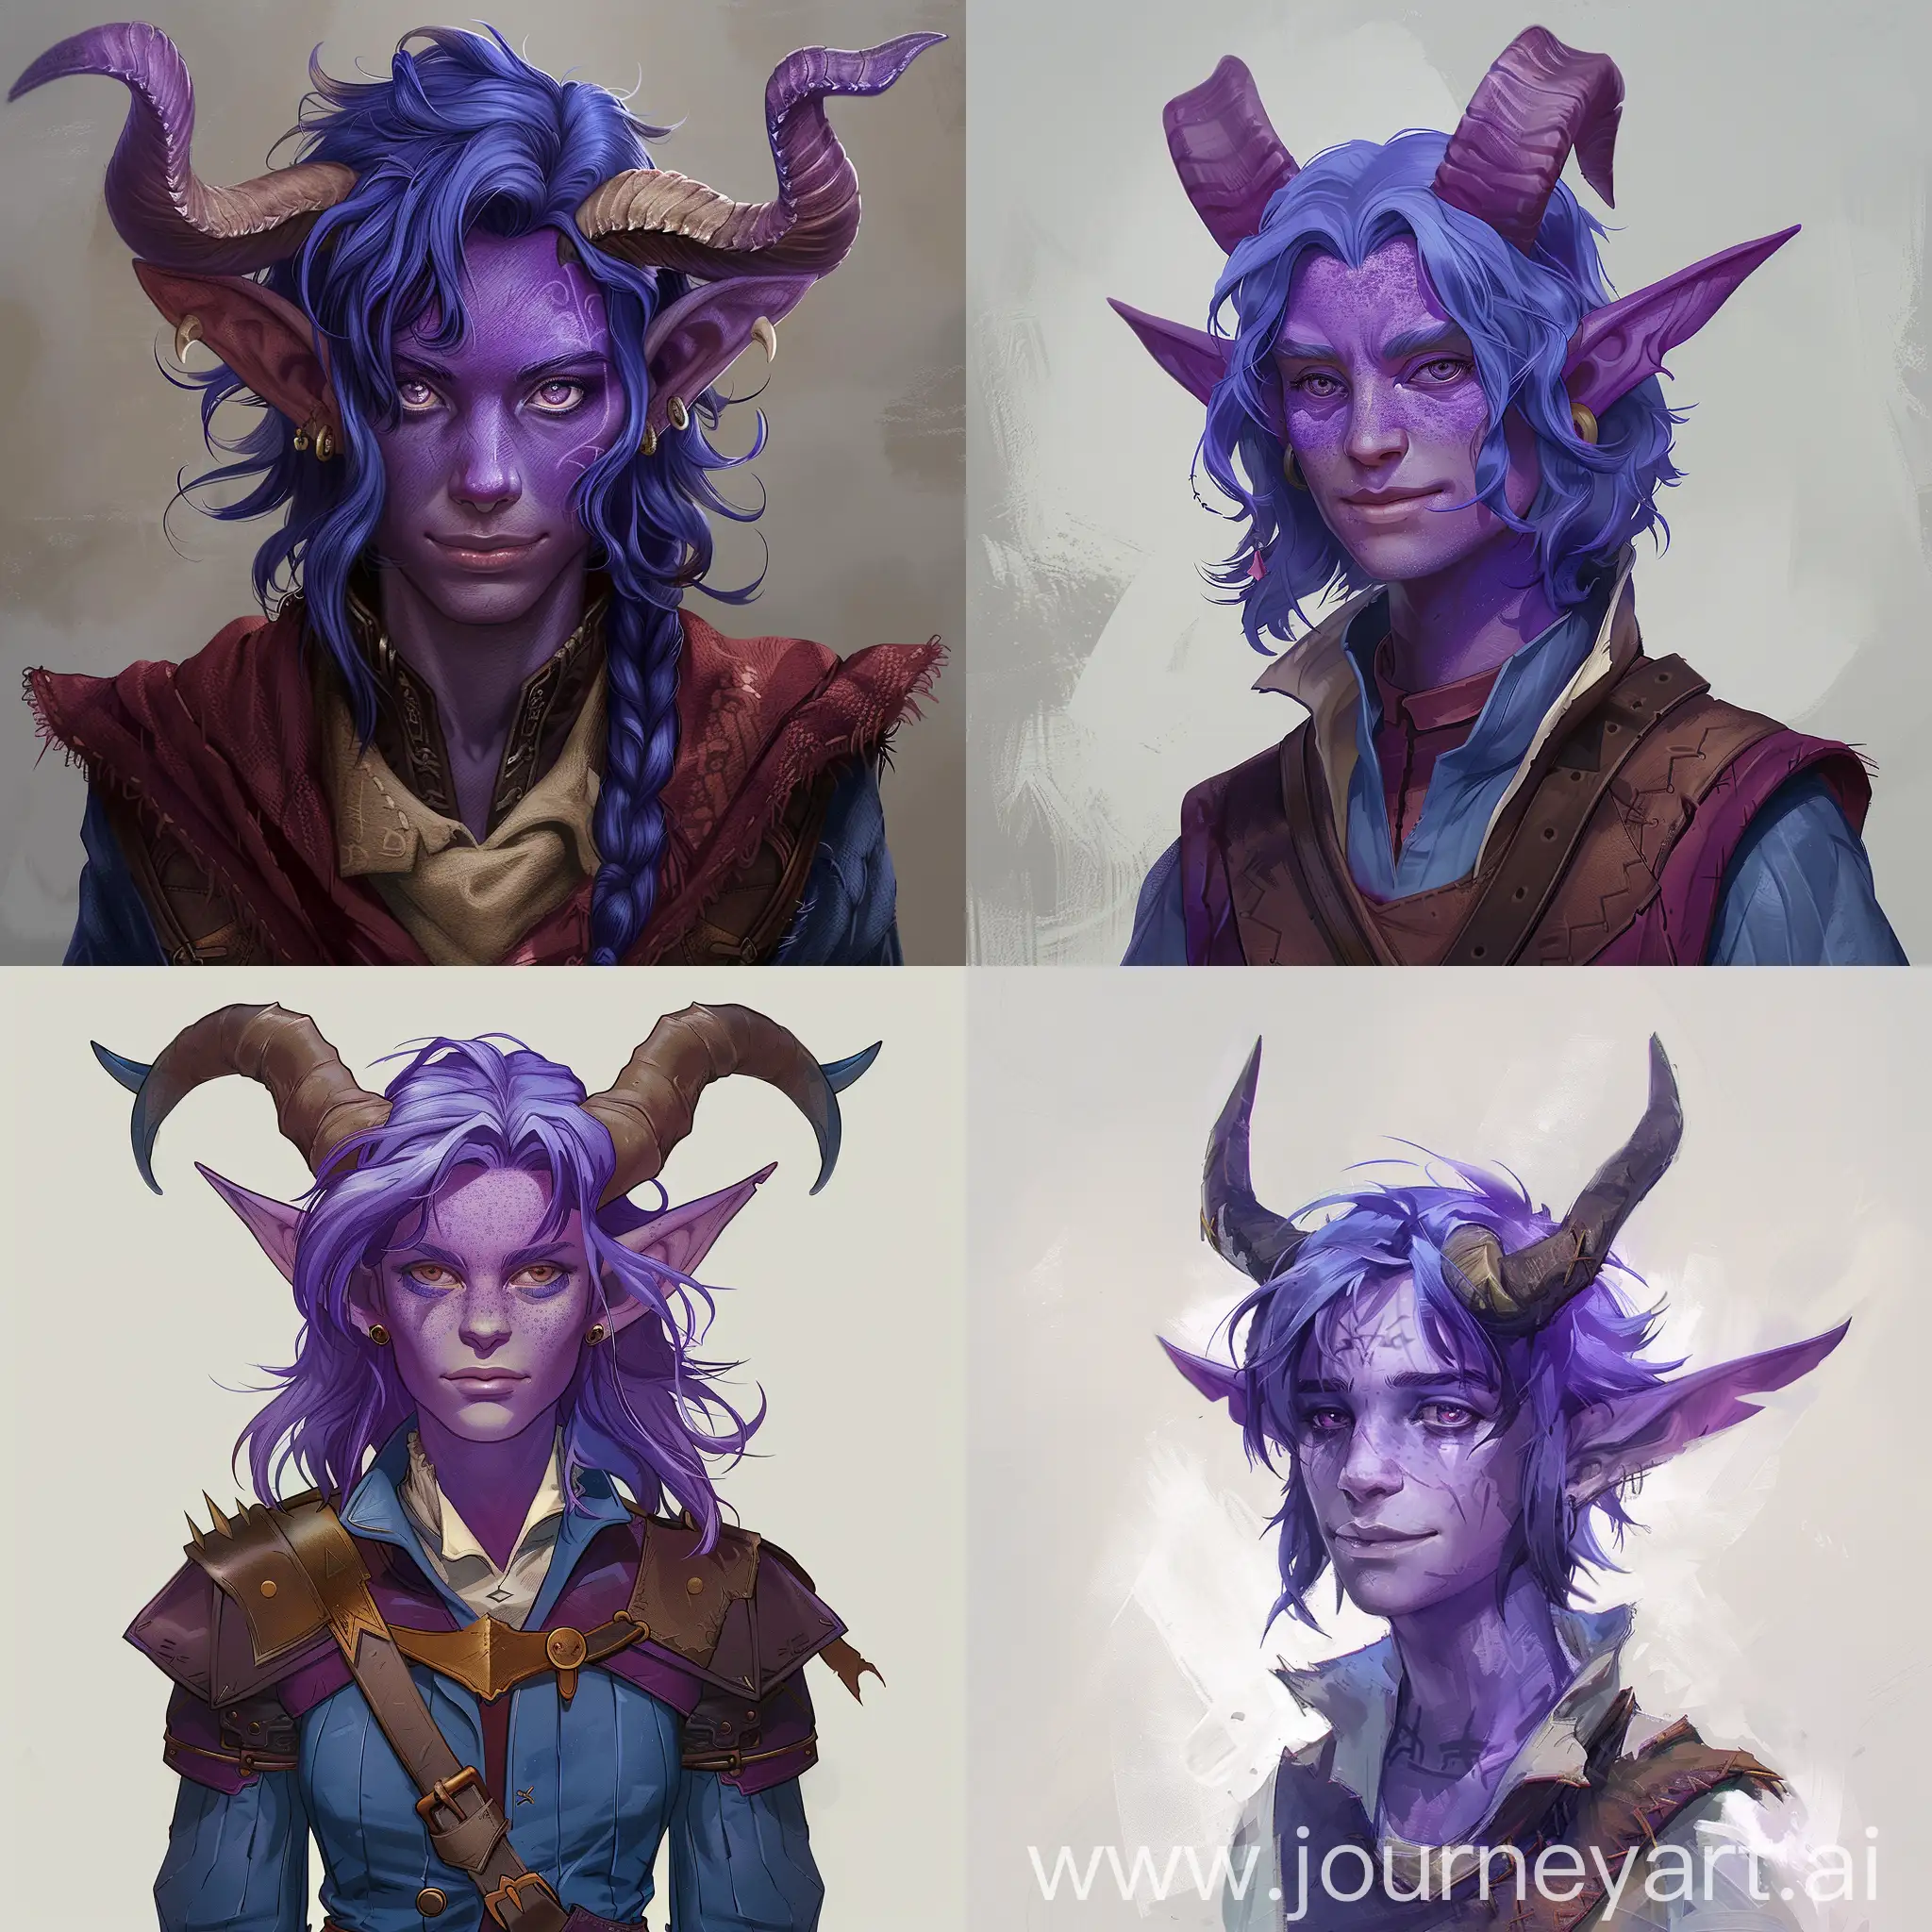 A halfing rouge, purple skin and purple horns, blue mid length hair. Androgynous. Thin. Short. And heroic.